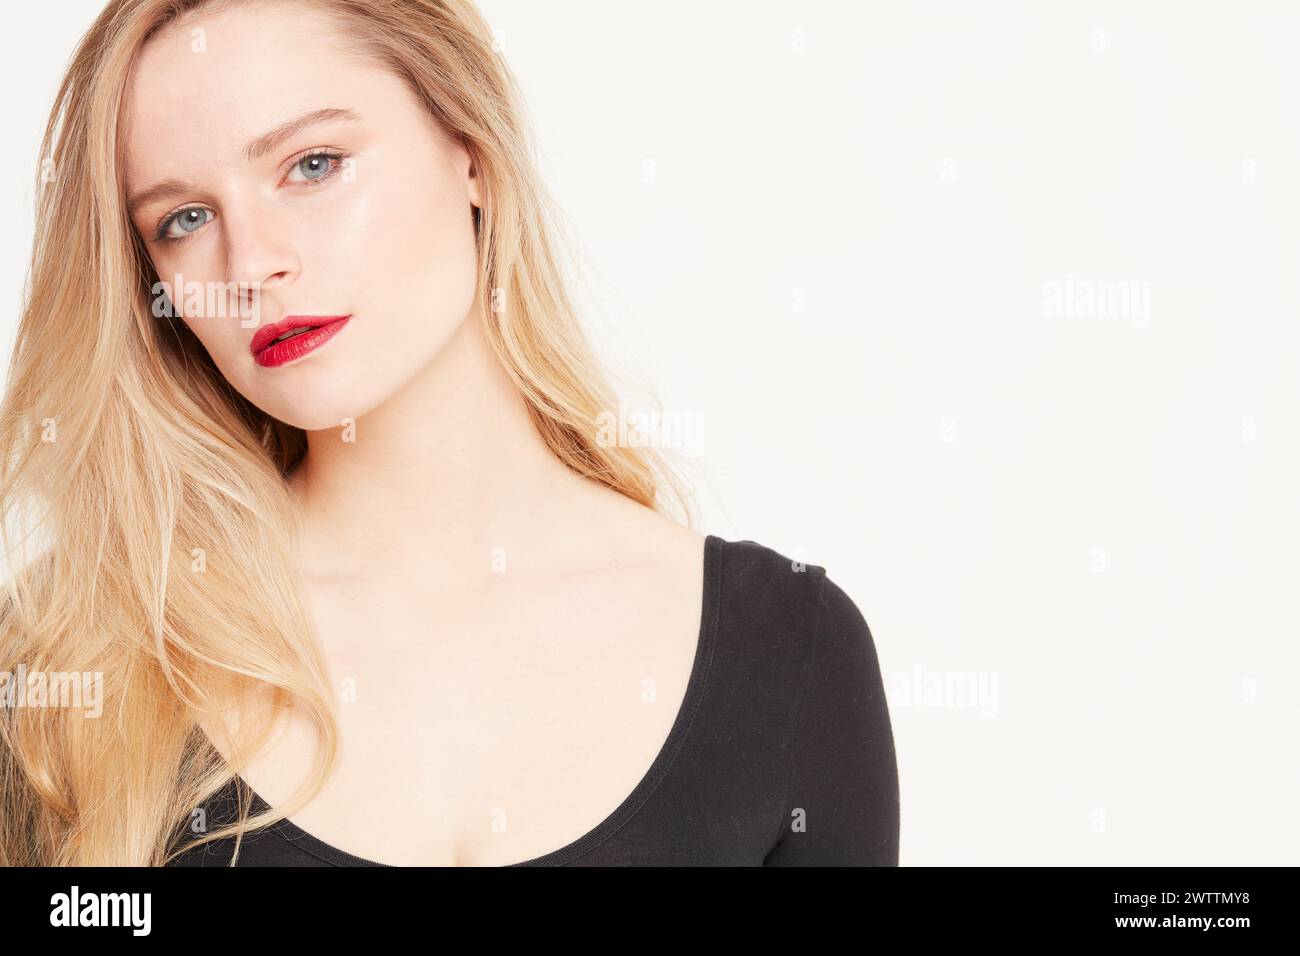 Blonde woman with red lipstick Stock Photo